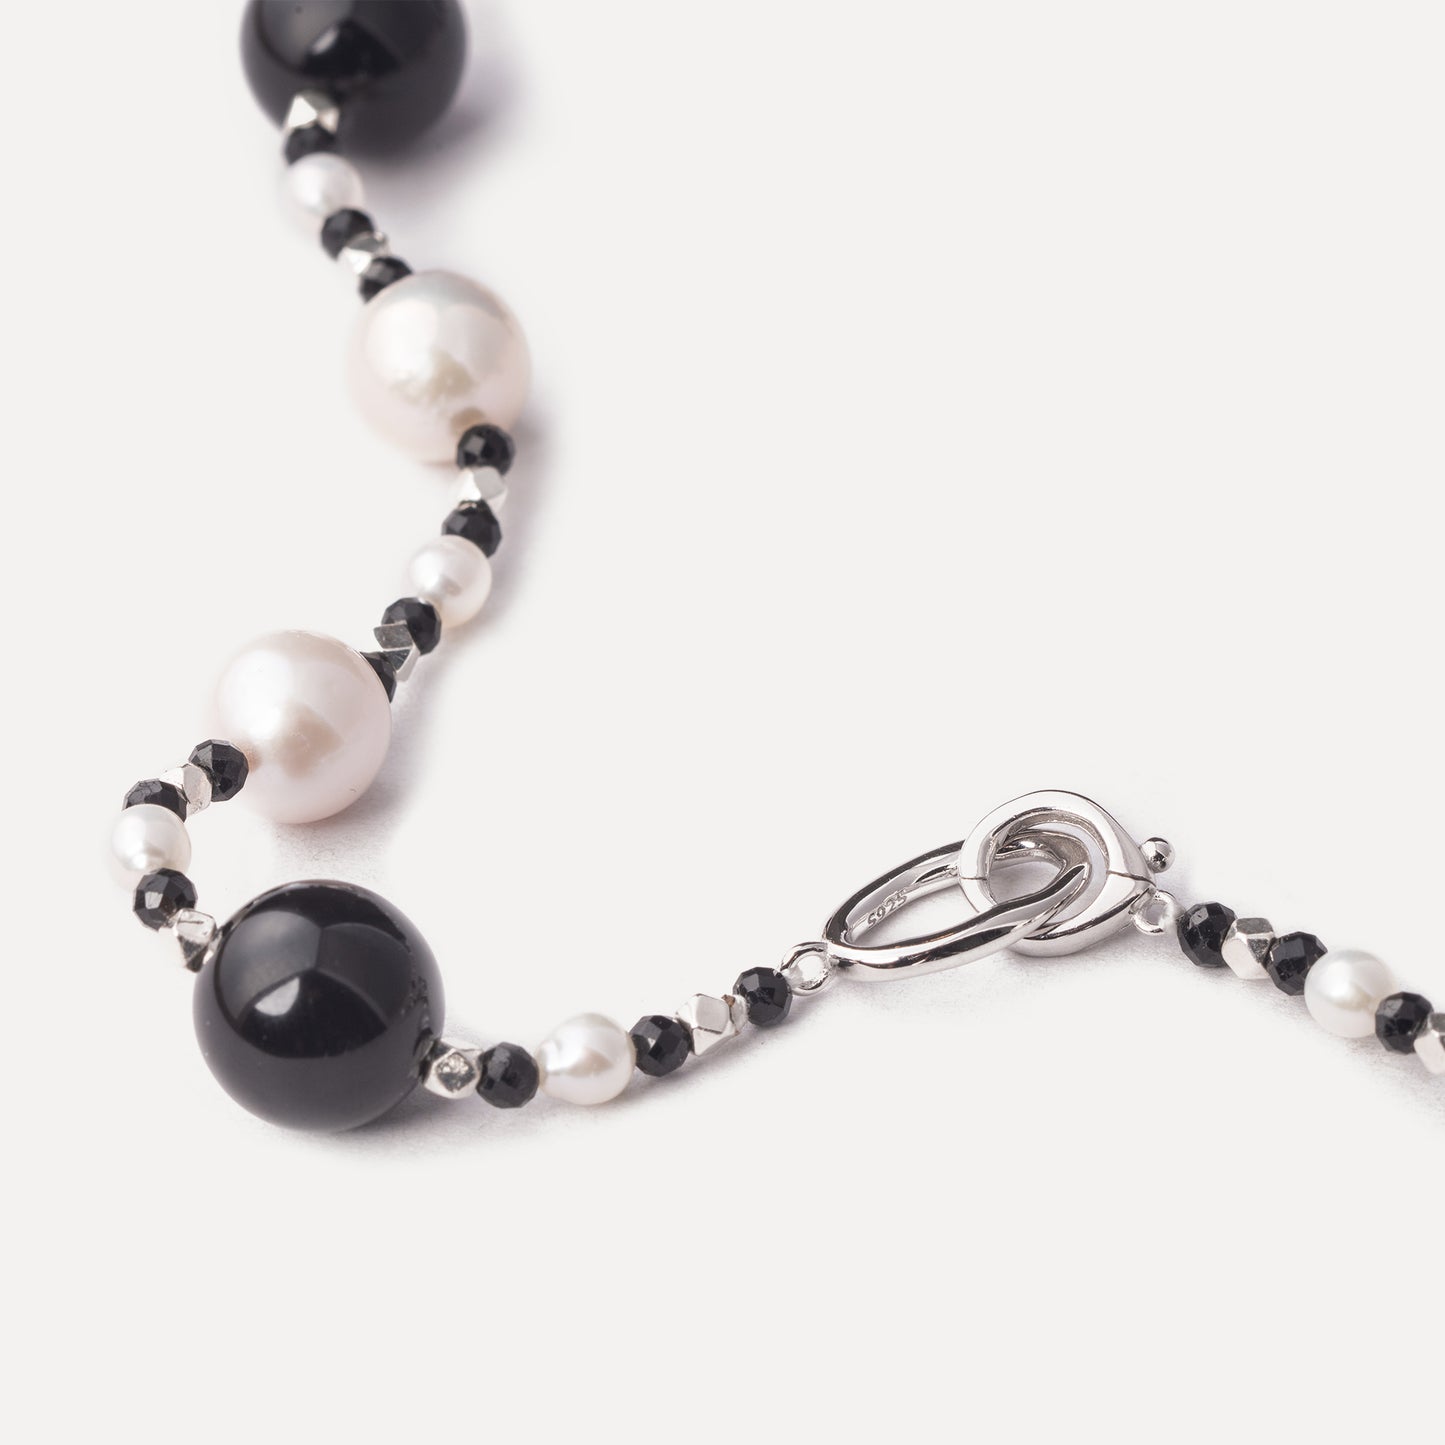 Black Onyx and Pearl Beaded Necklace